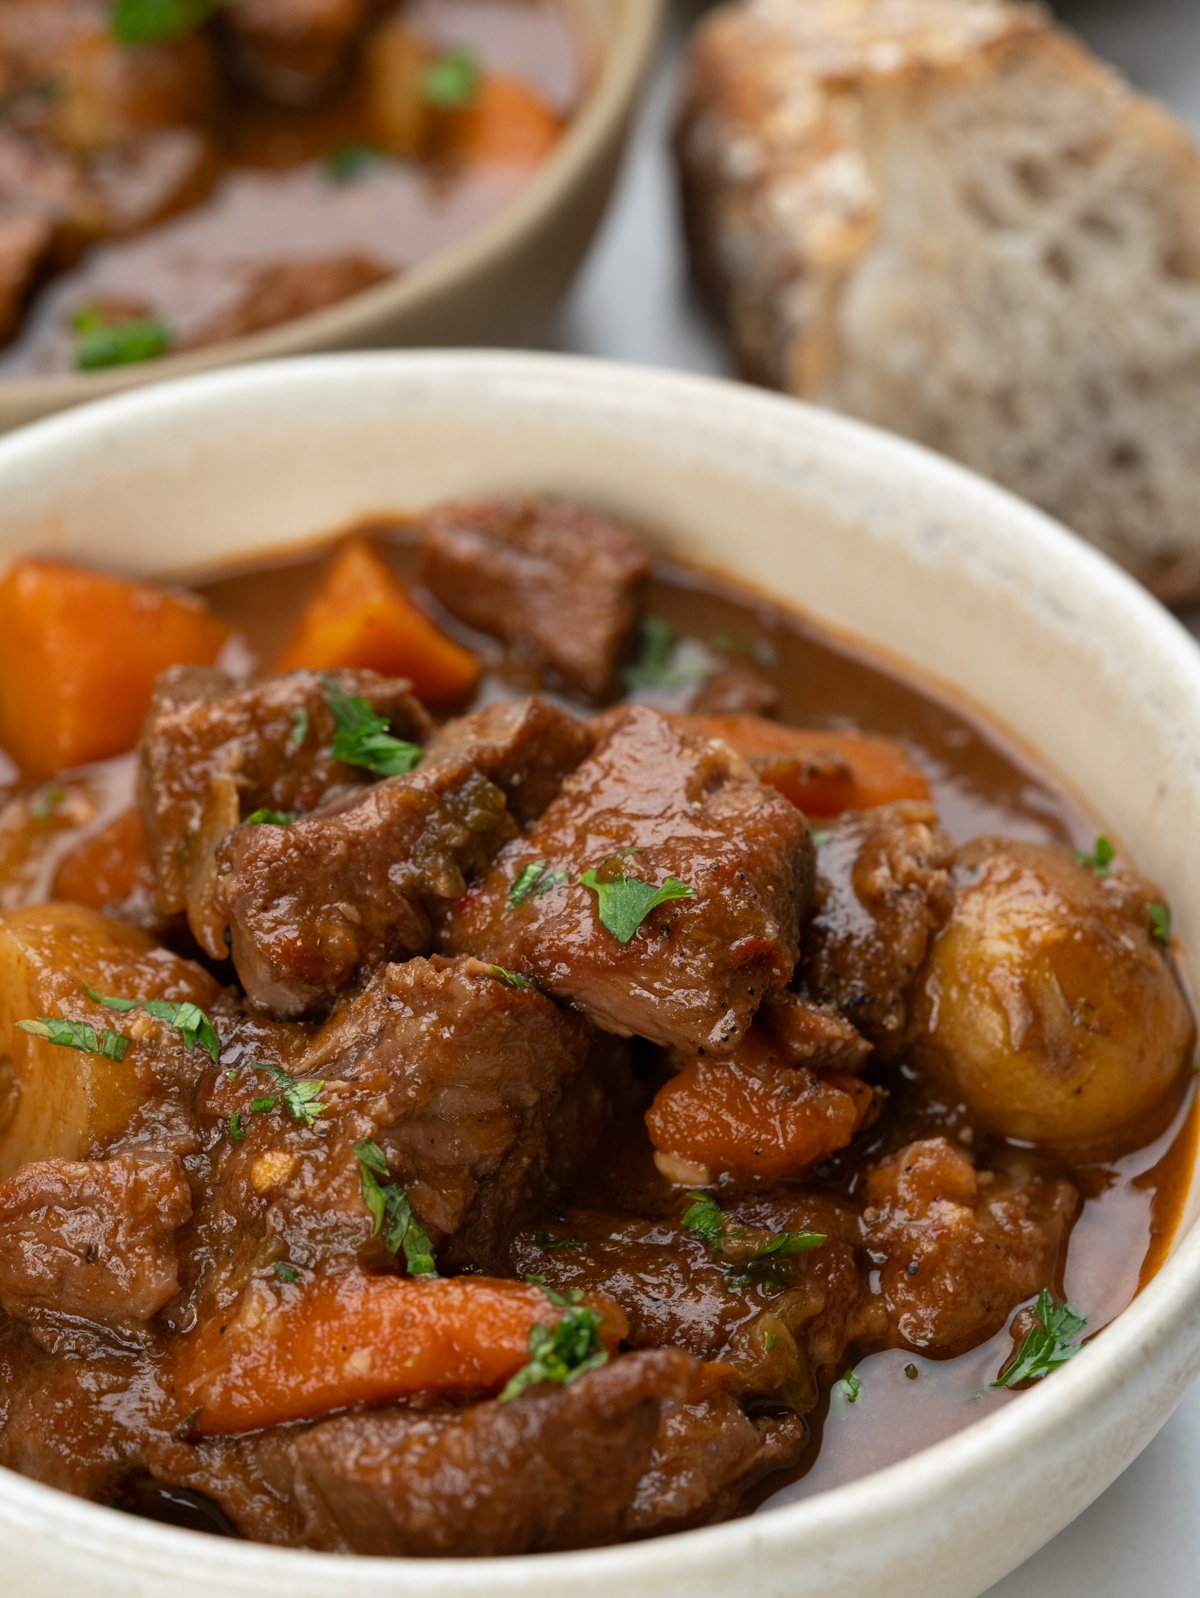 lamb stew with tender, fall-apart lamb chunks, potatoes and carrot has a rustic flavourful thick broth